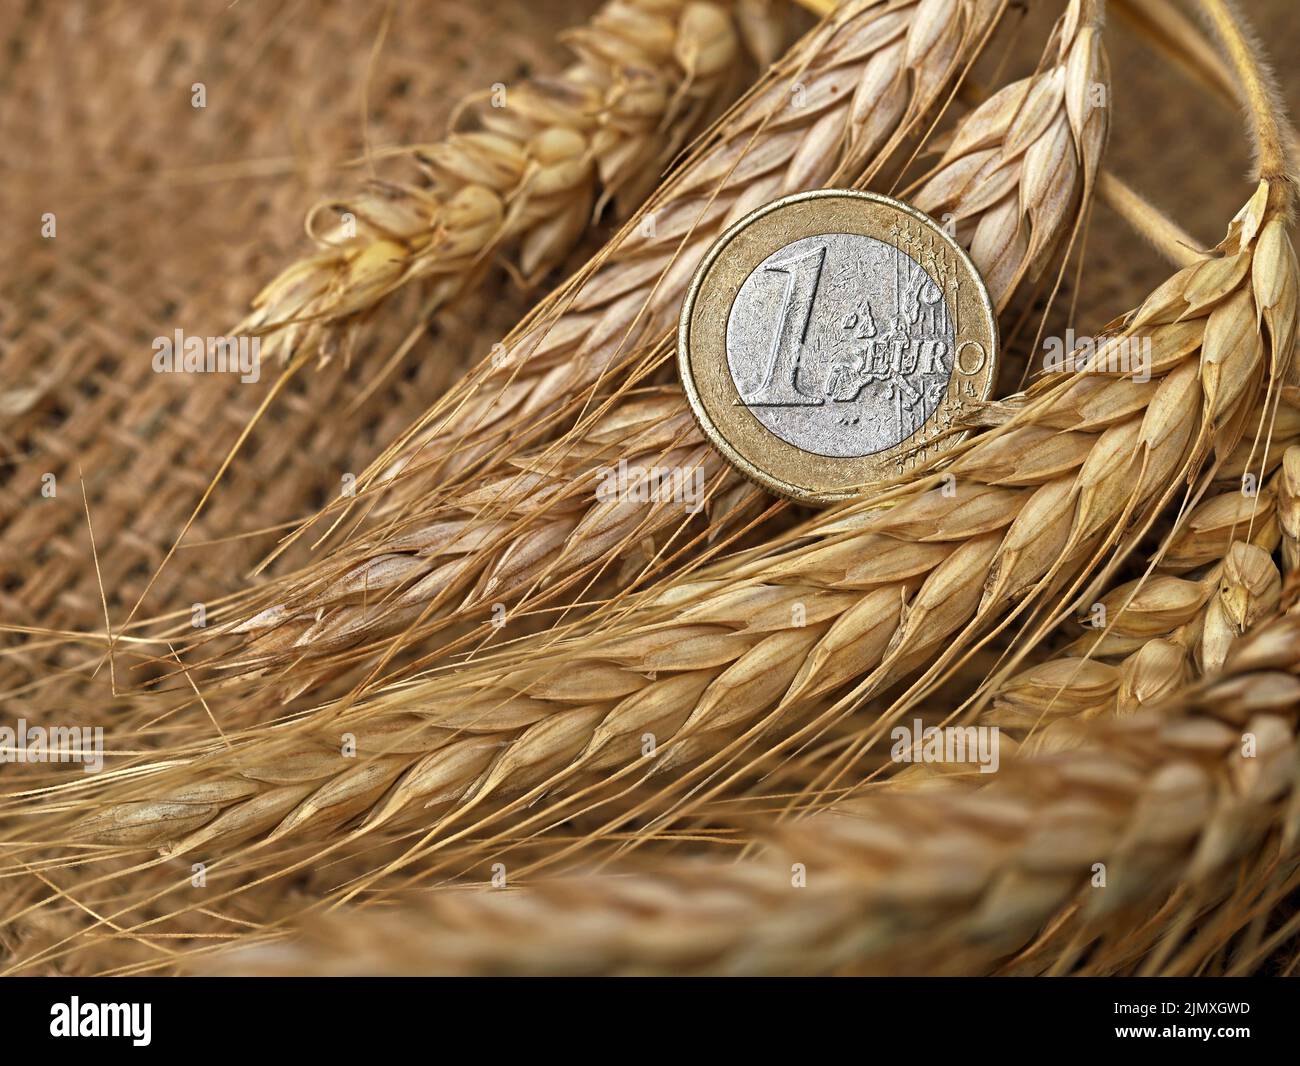 close-up of one euro coin on fresh ears of wheat, concept image of rising wheat price in the future Stock Photo